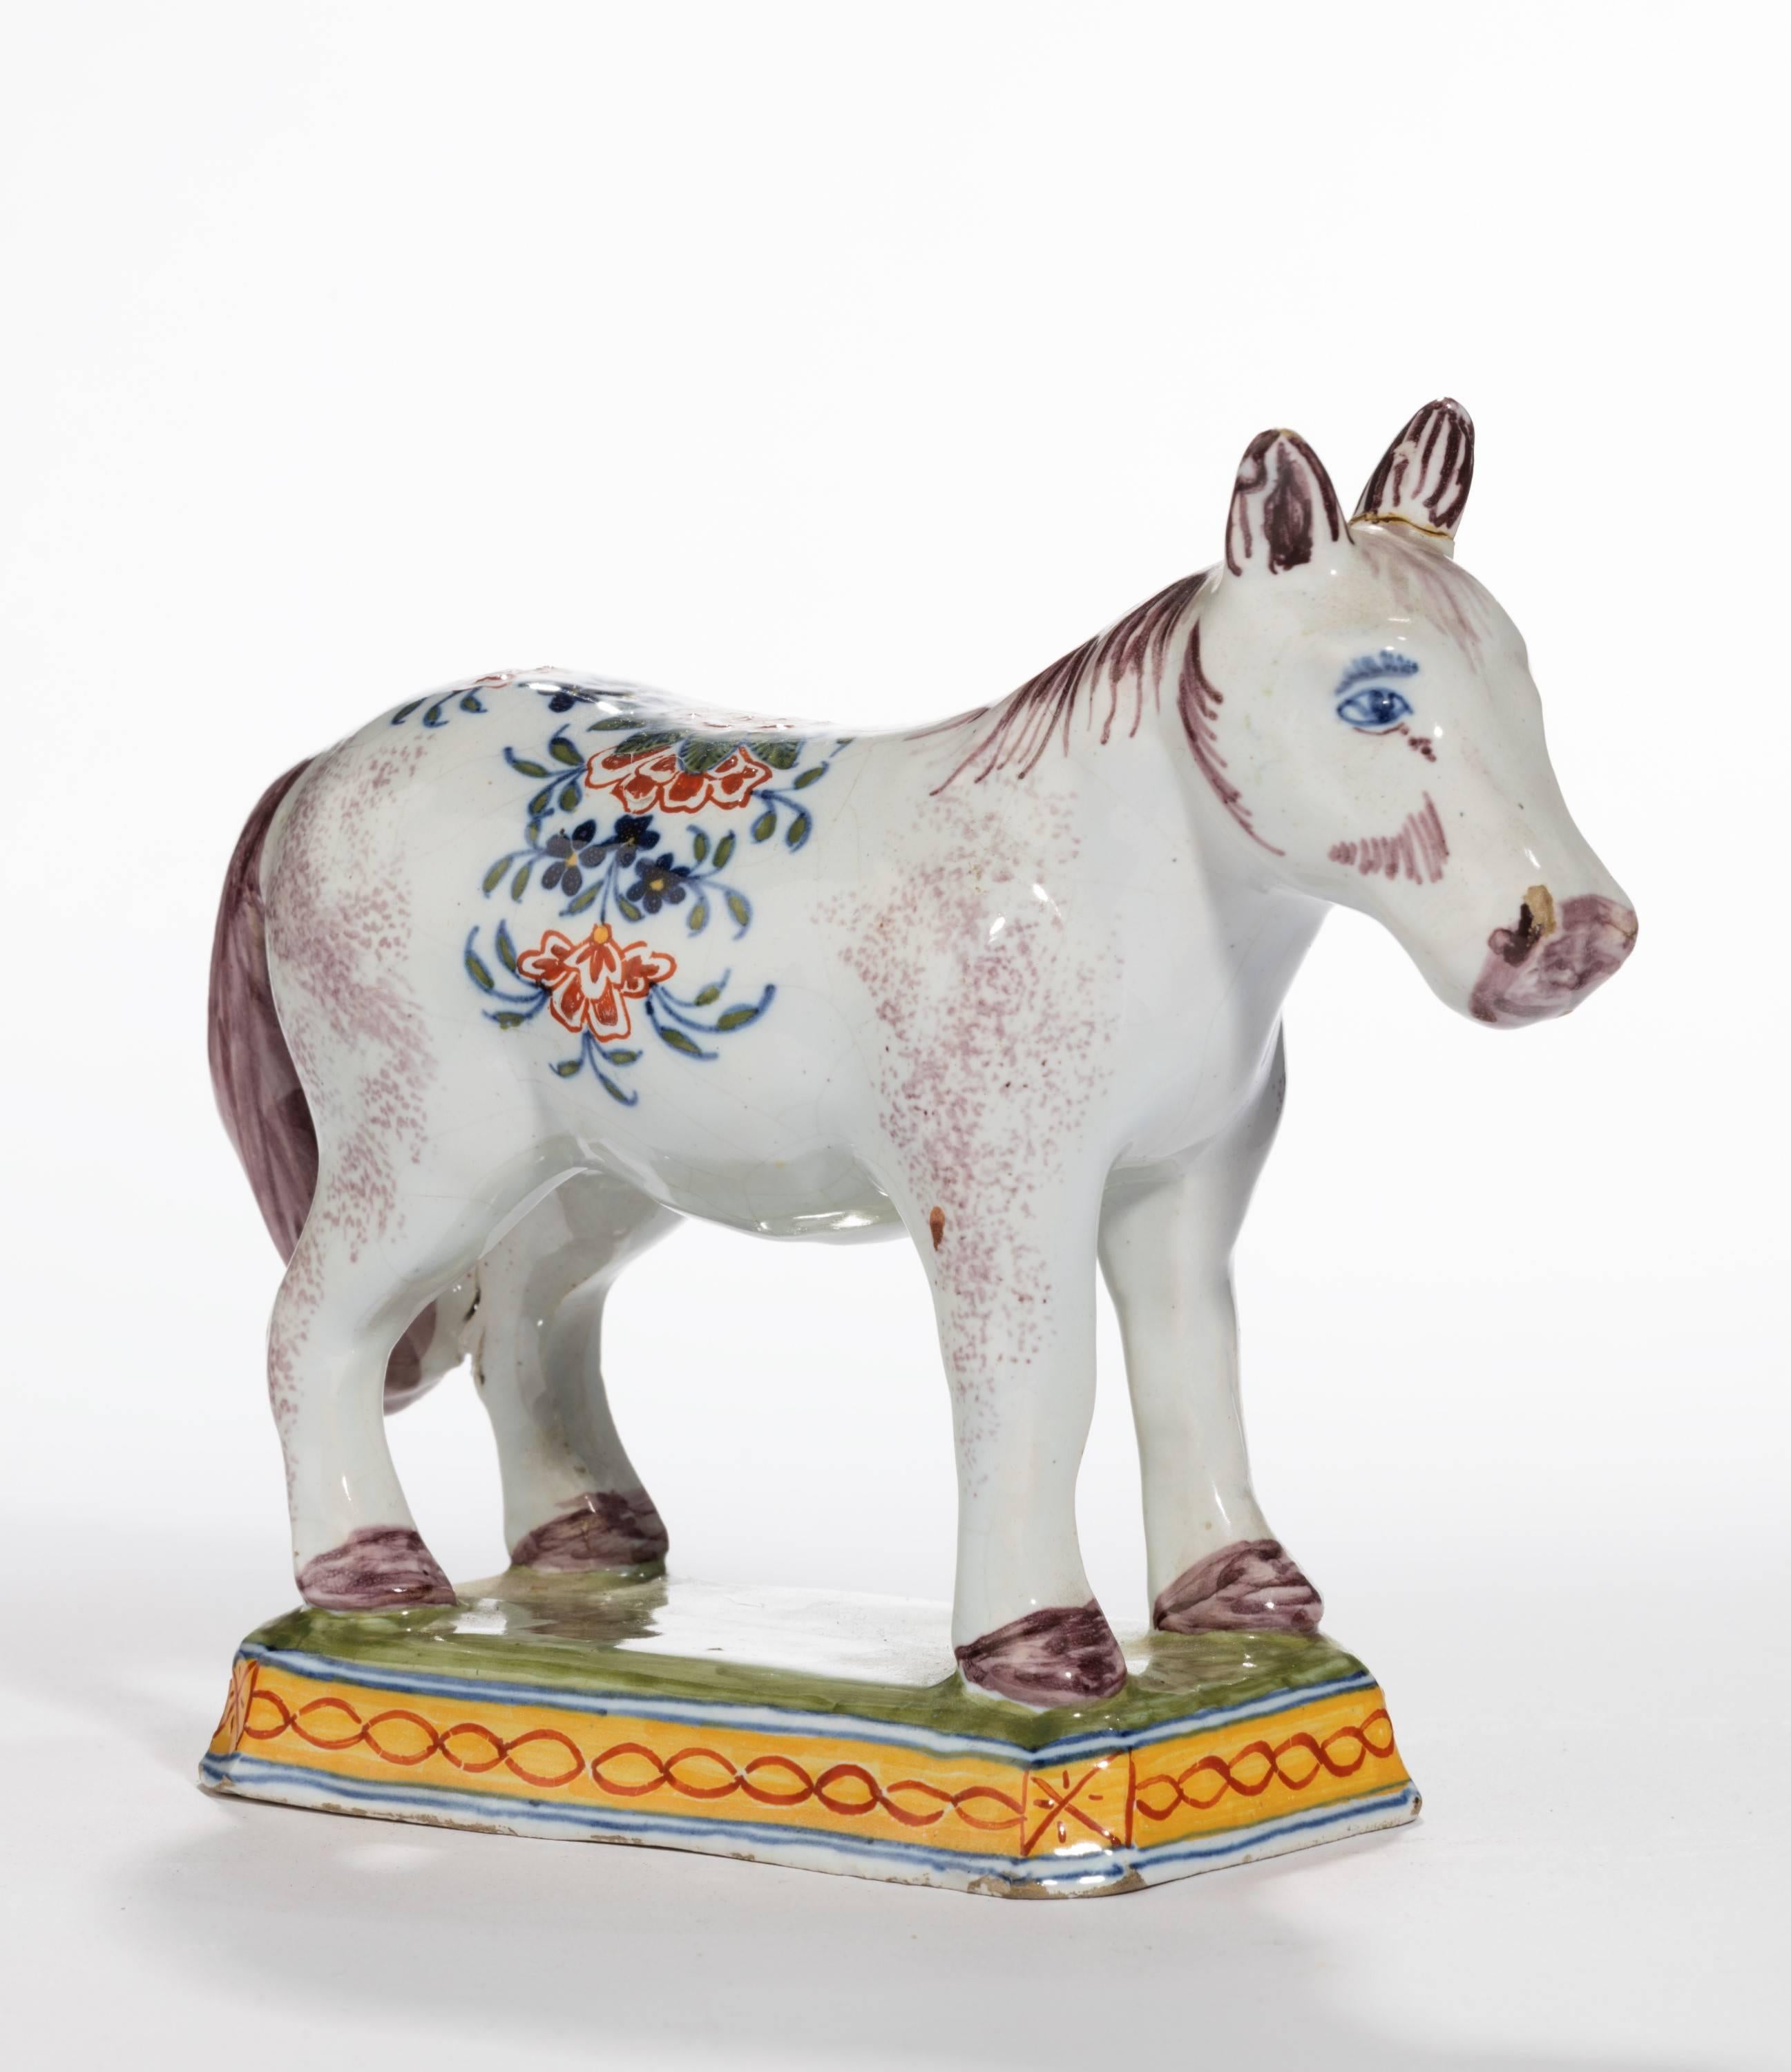 A small faïence model of a horse. Excellent overall condition.